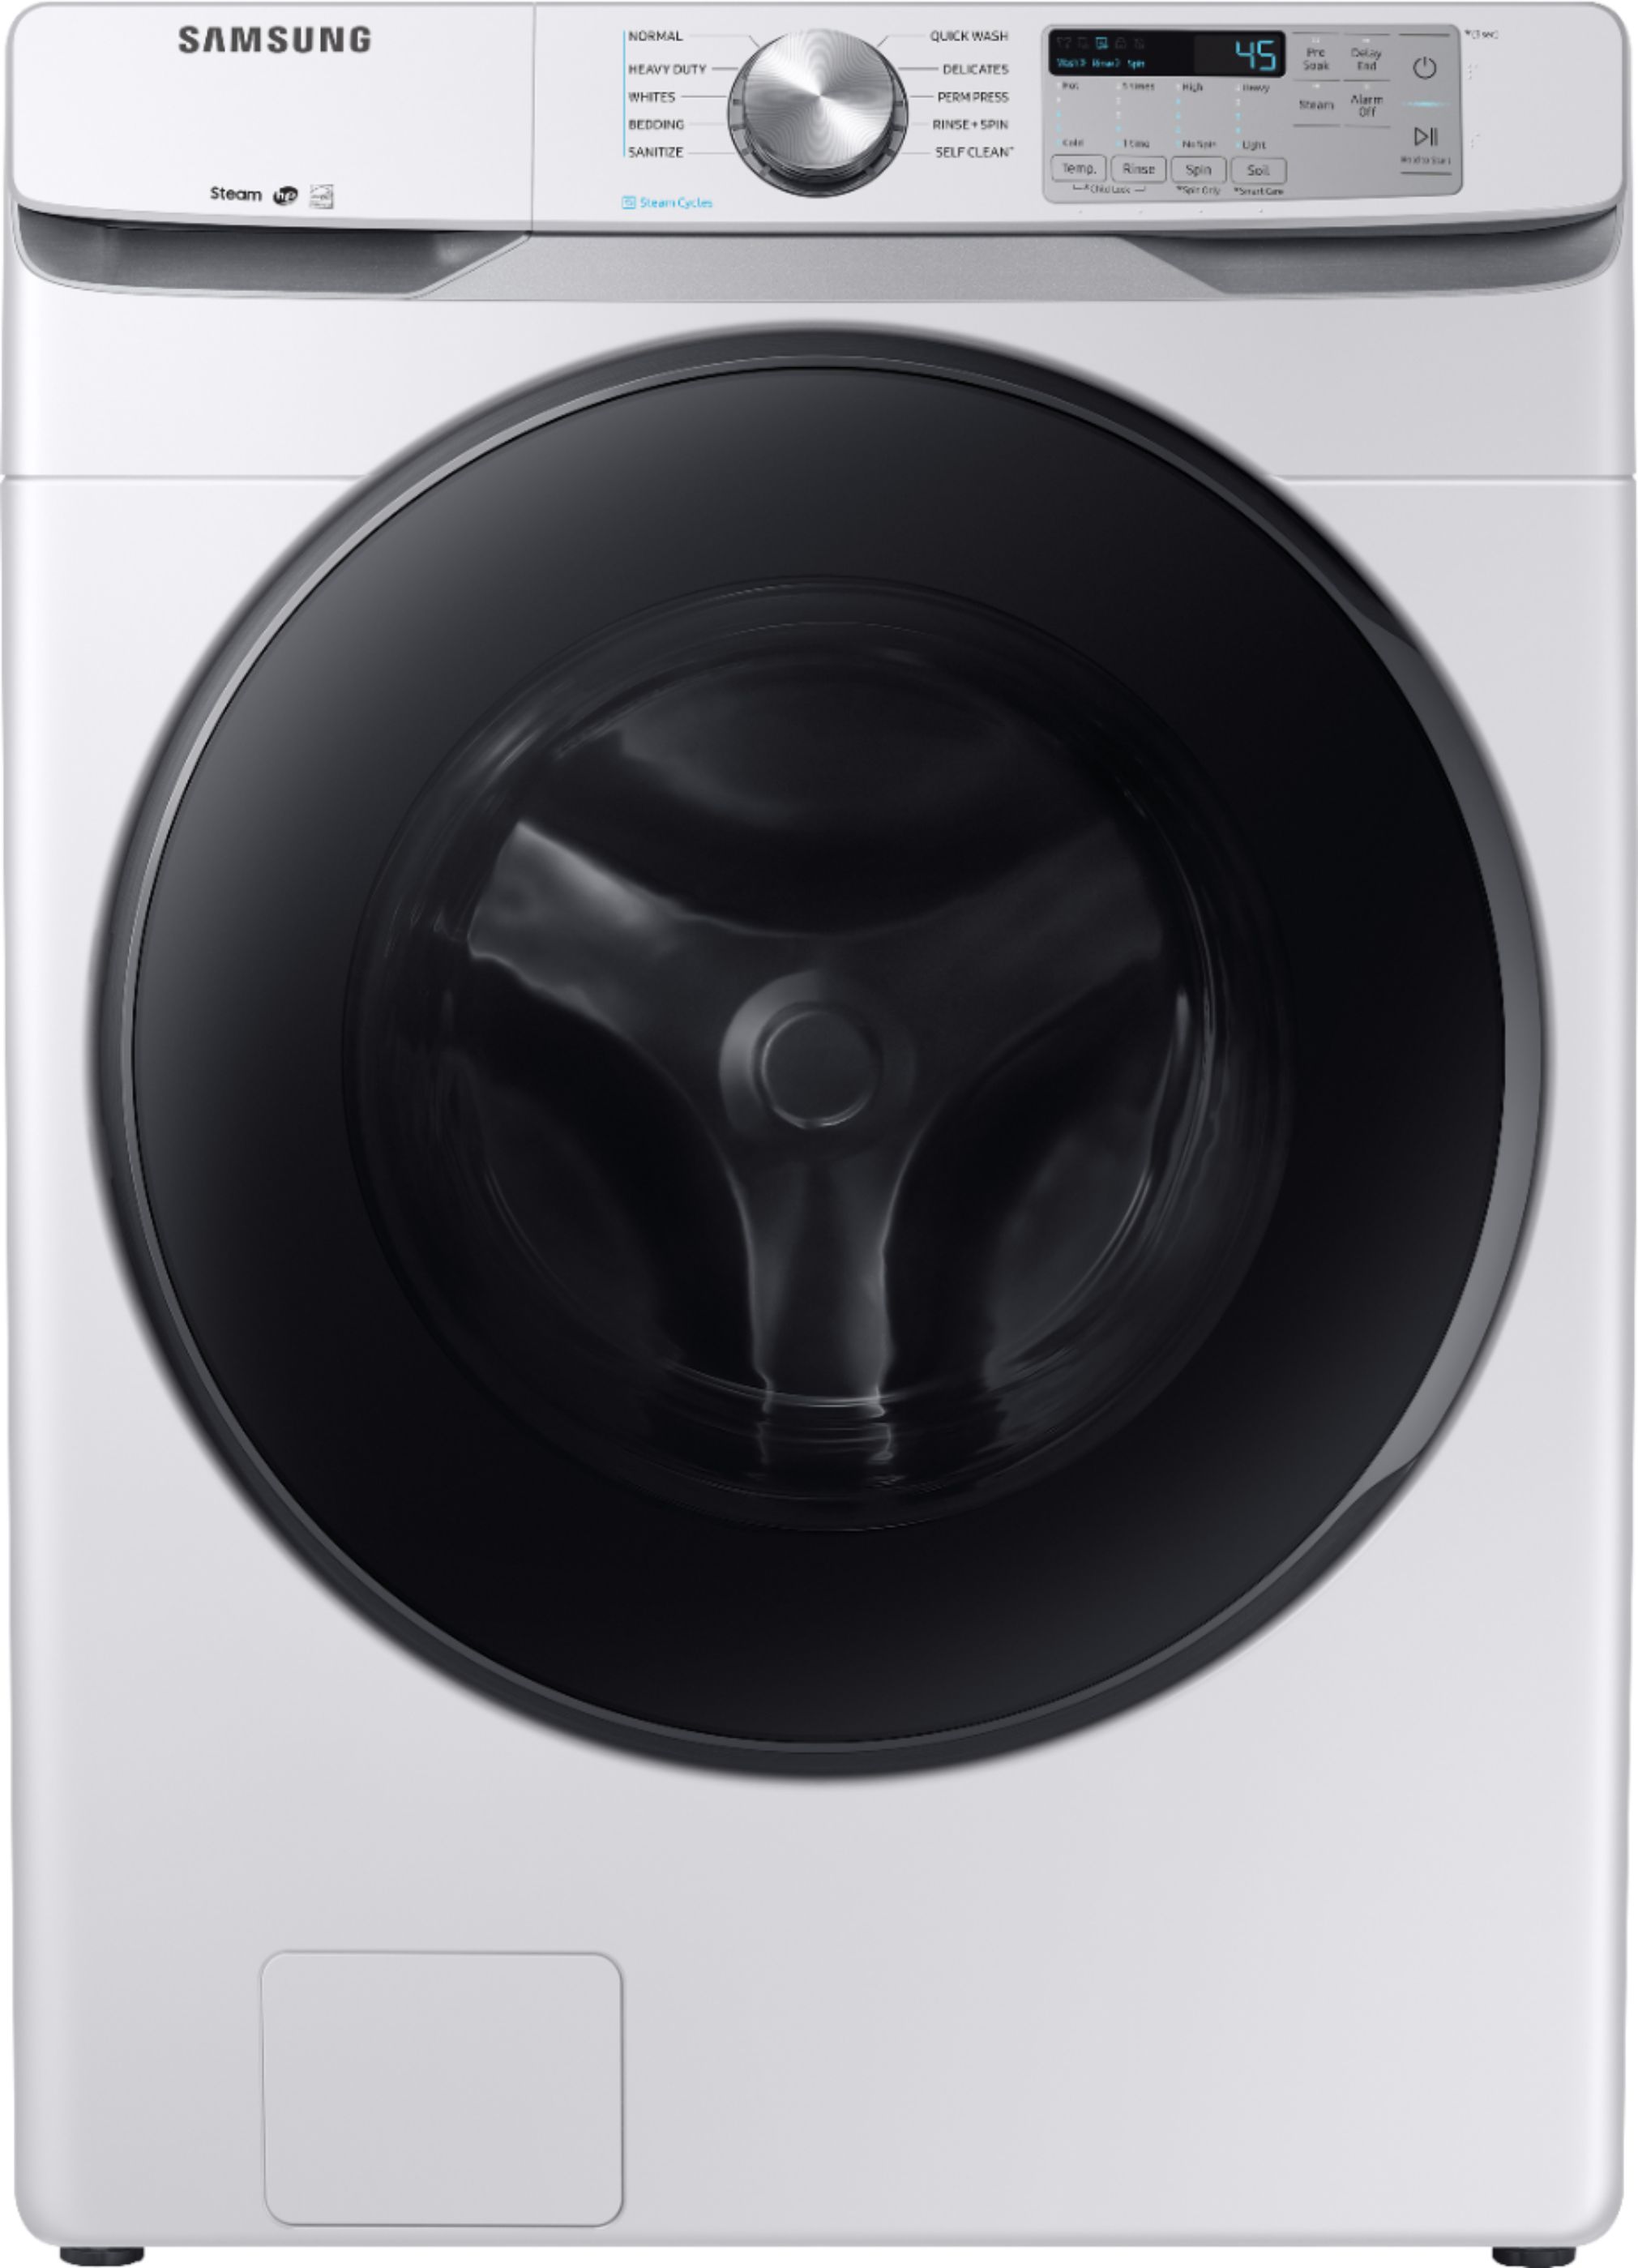 Samsung - 4.5 cu. ft. High Efficiency Stackable Front Load Washer with Steam - White